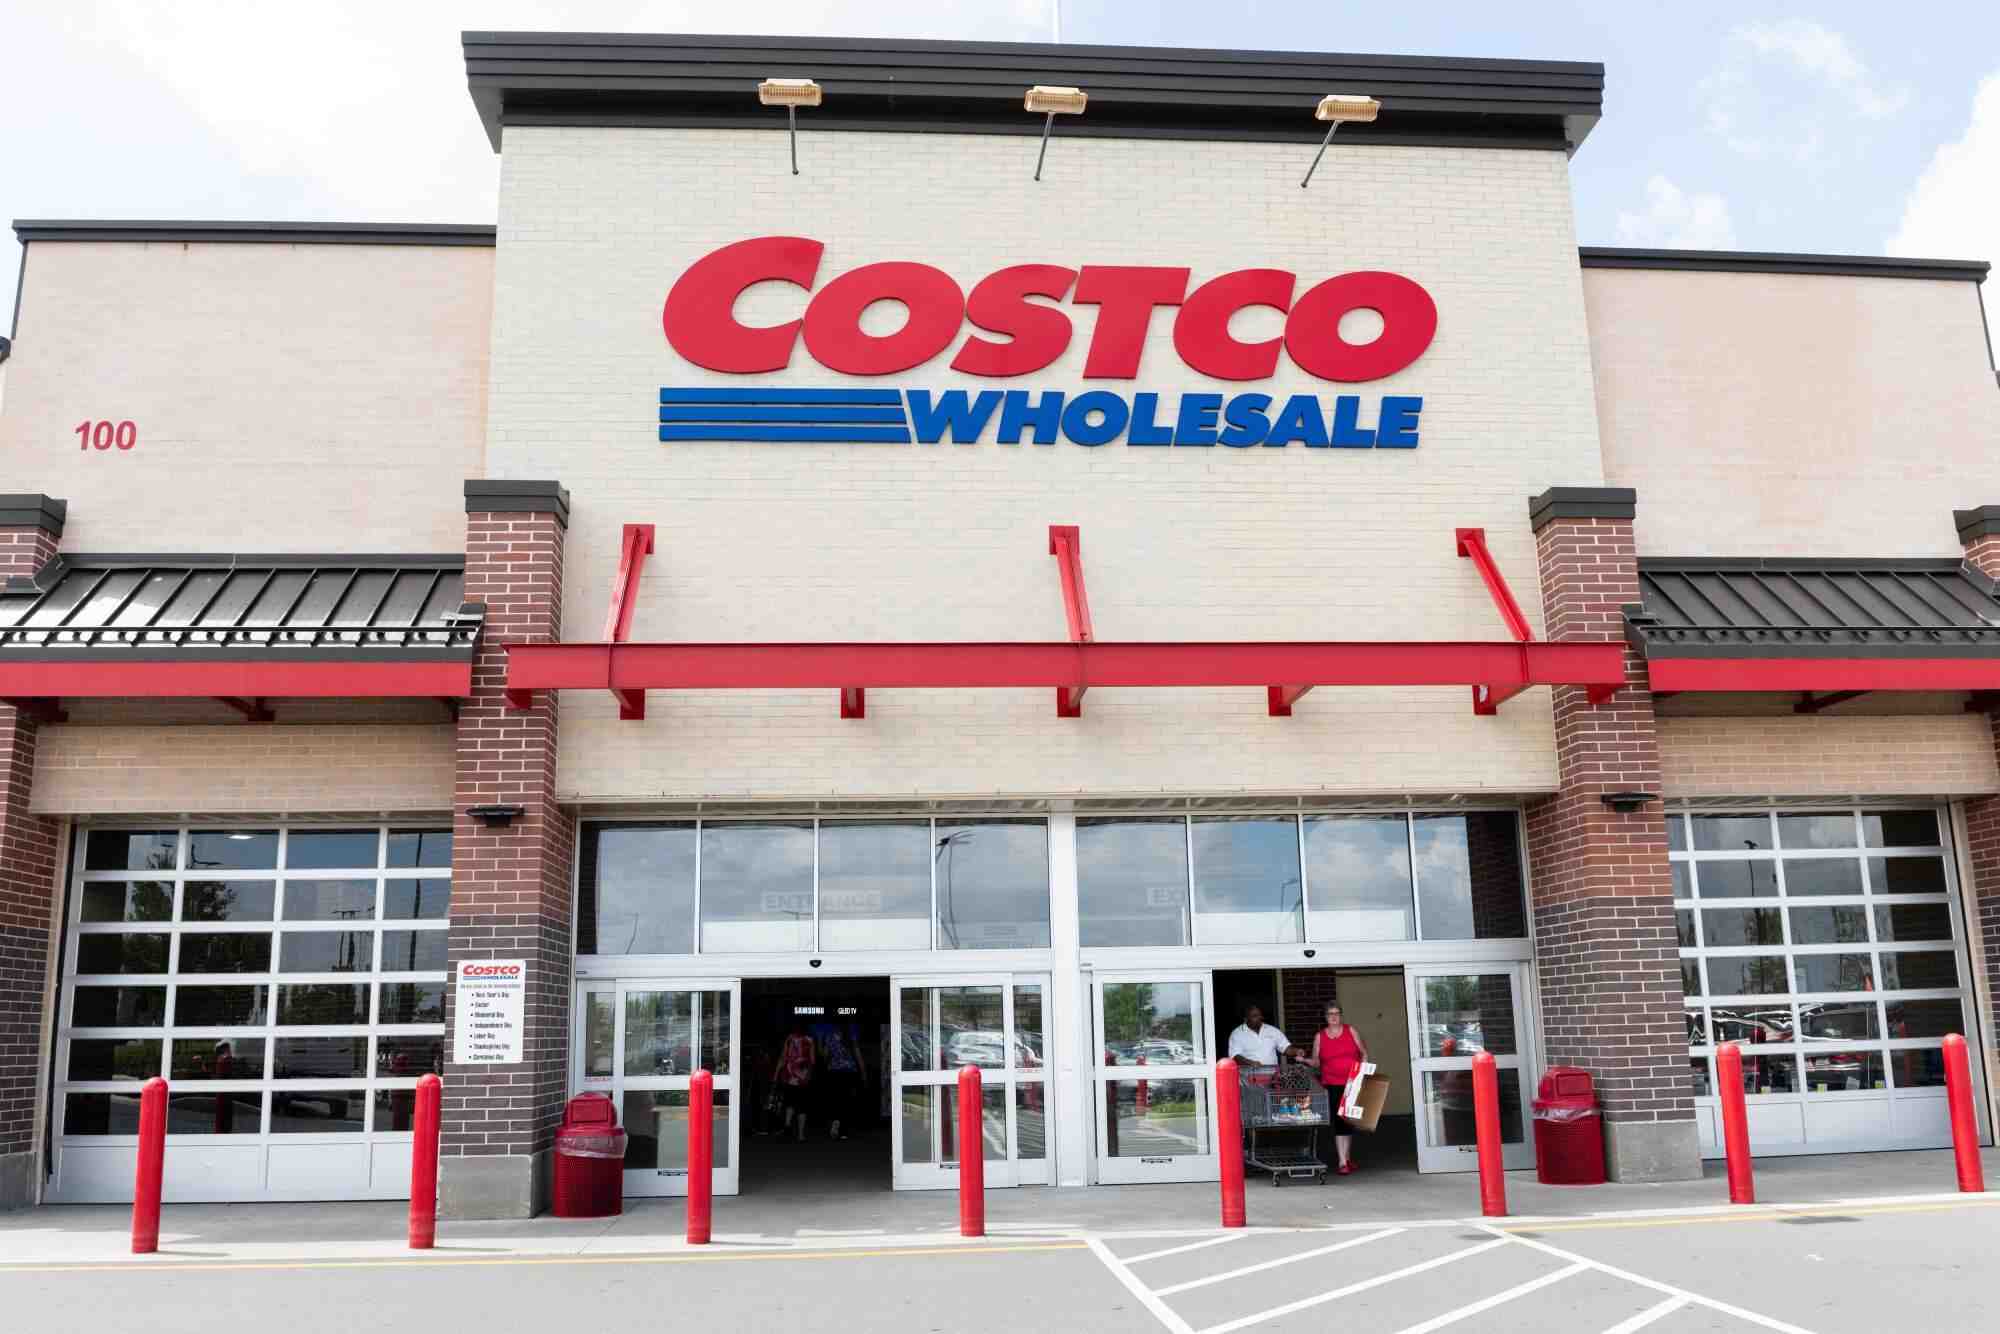 What's wrong with Costco rotisserie chicken?